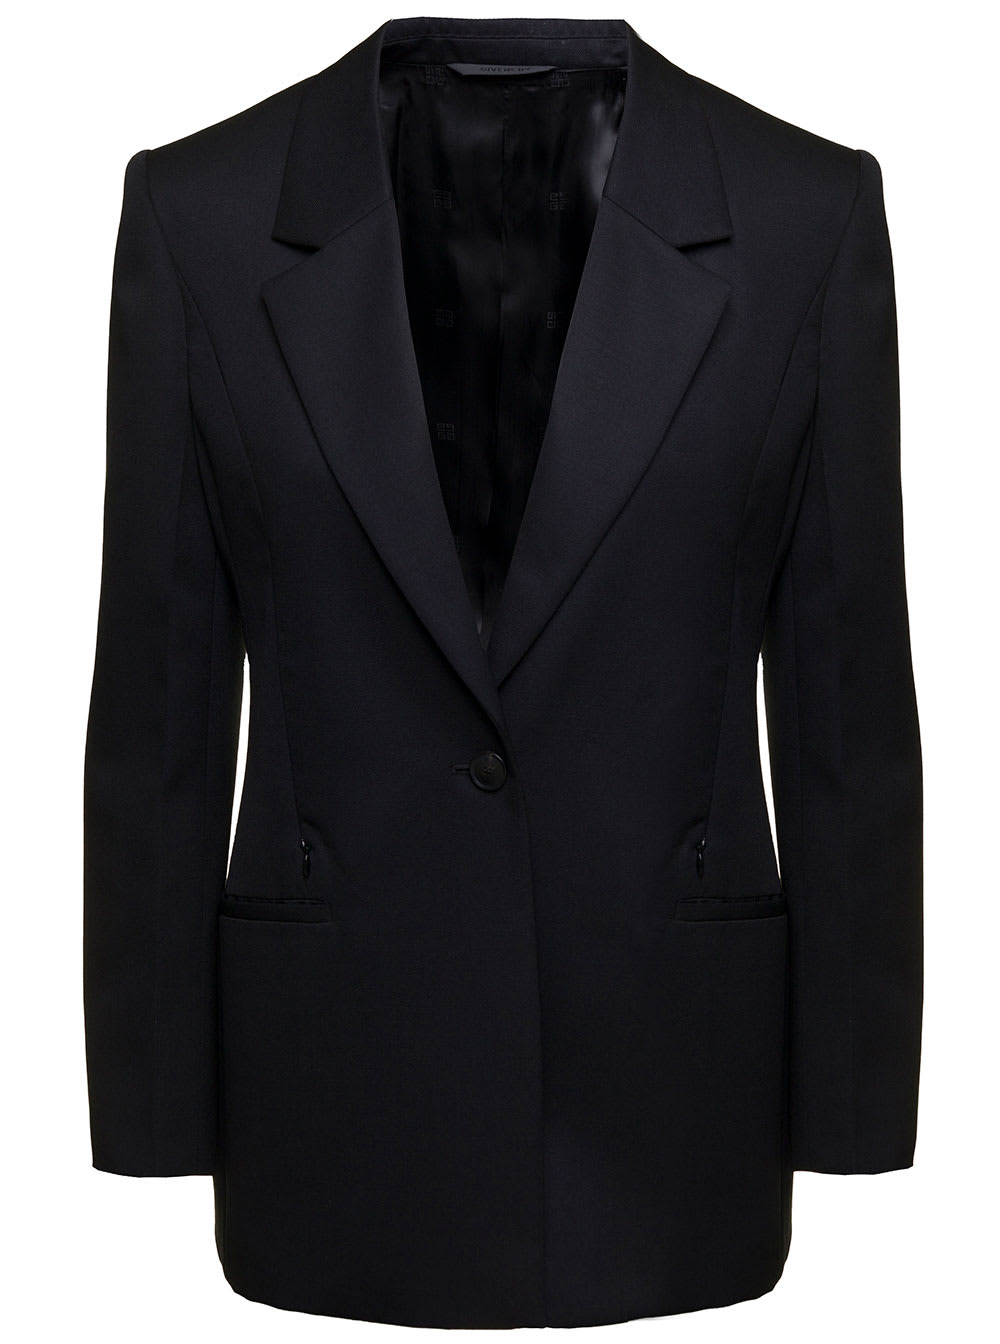 GIVENCHY BLACK SINGLE-BREASTED JACKET WITH NOTCHED REVERS IN WOOL AND MOHAIR WOMAN